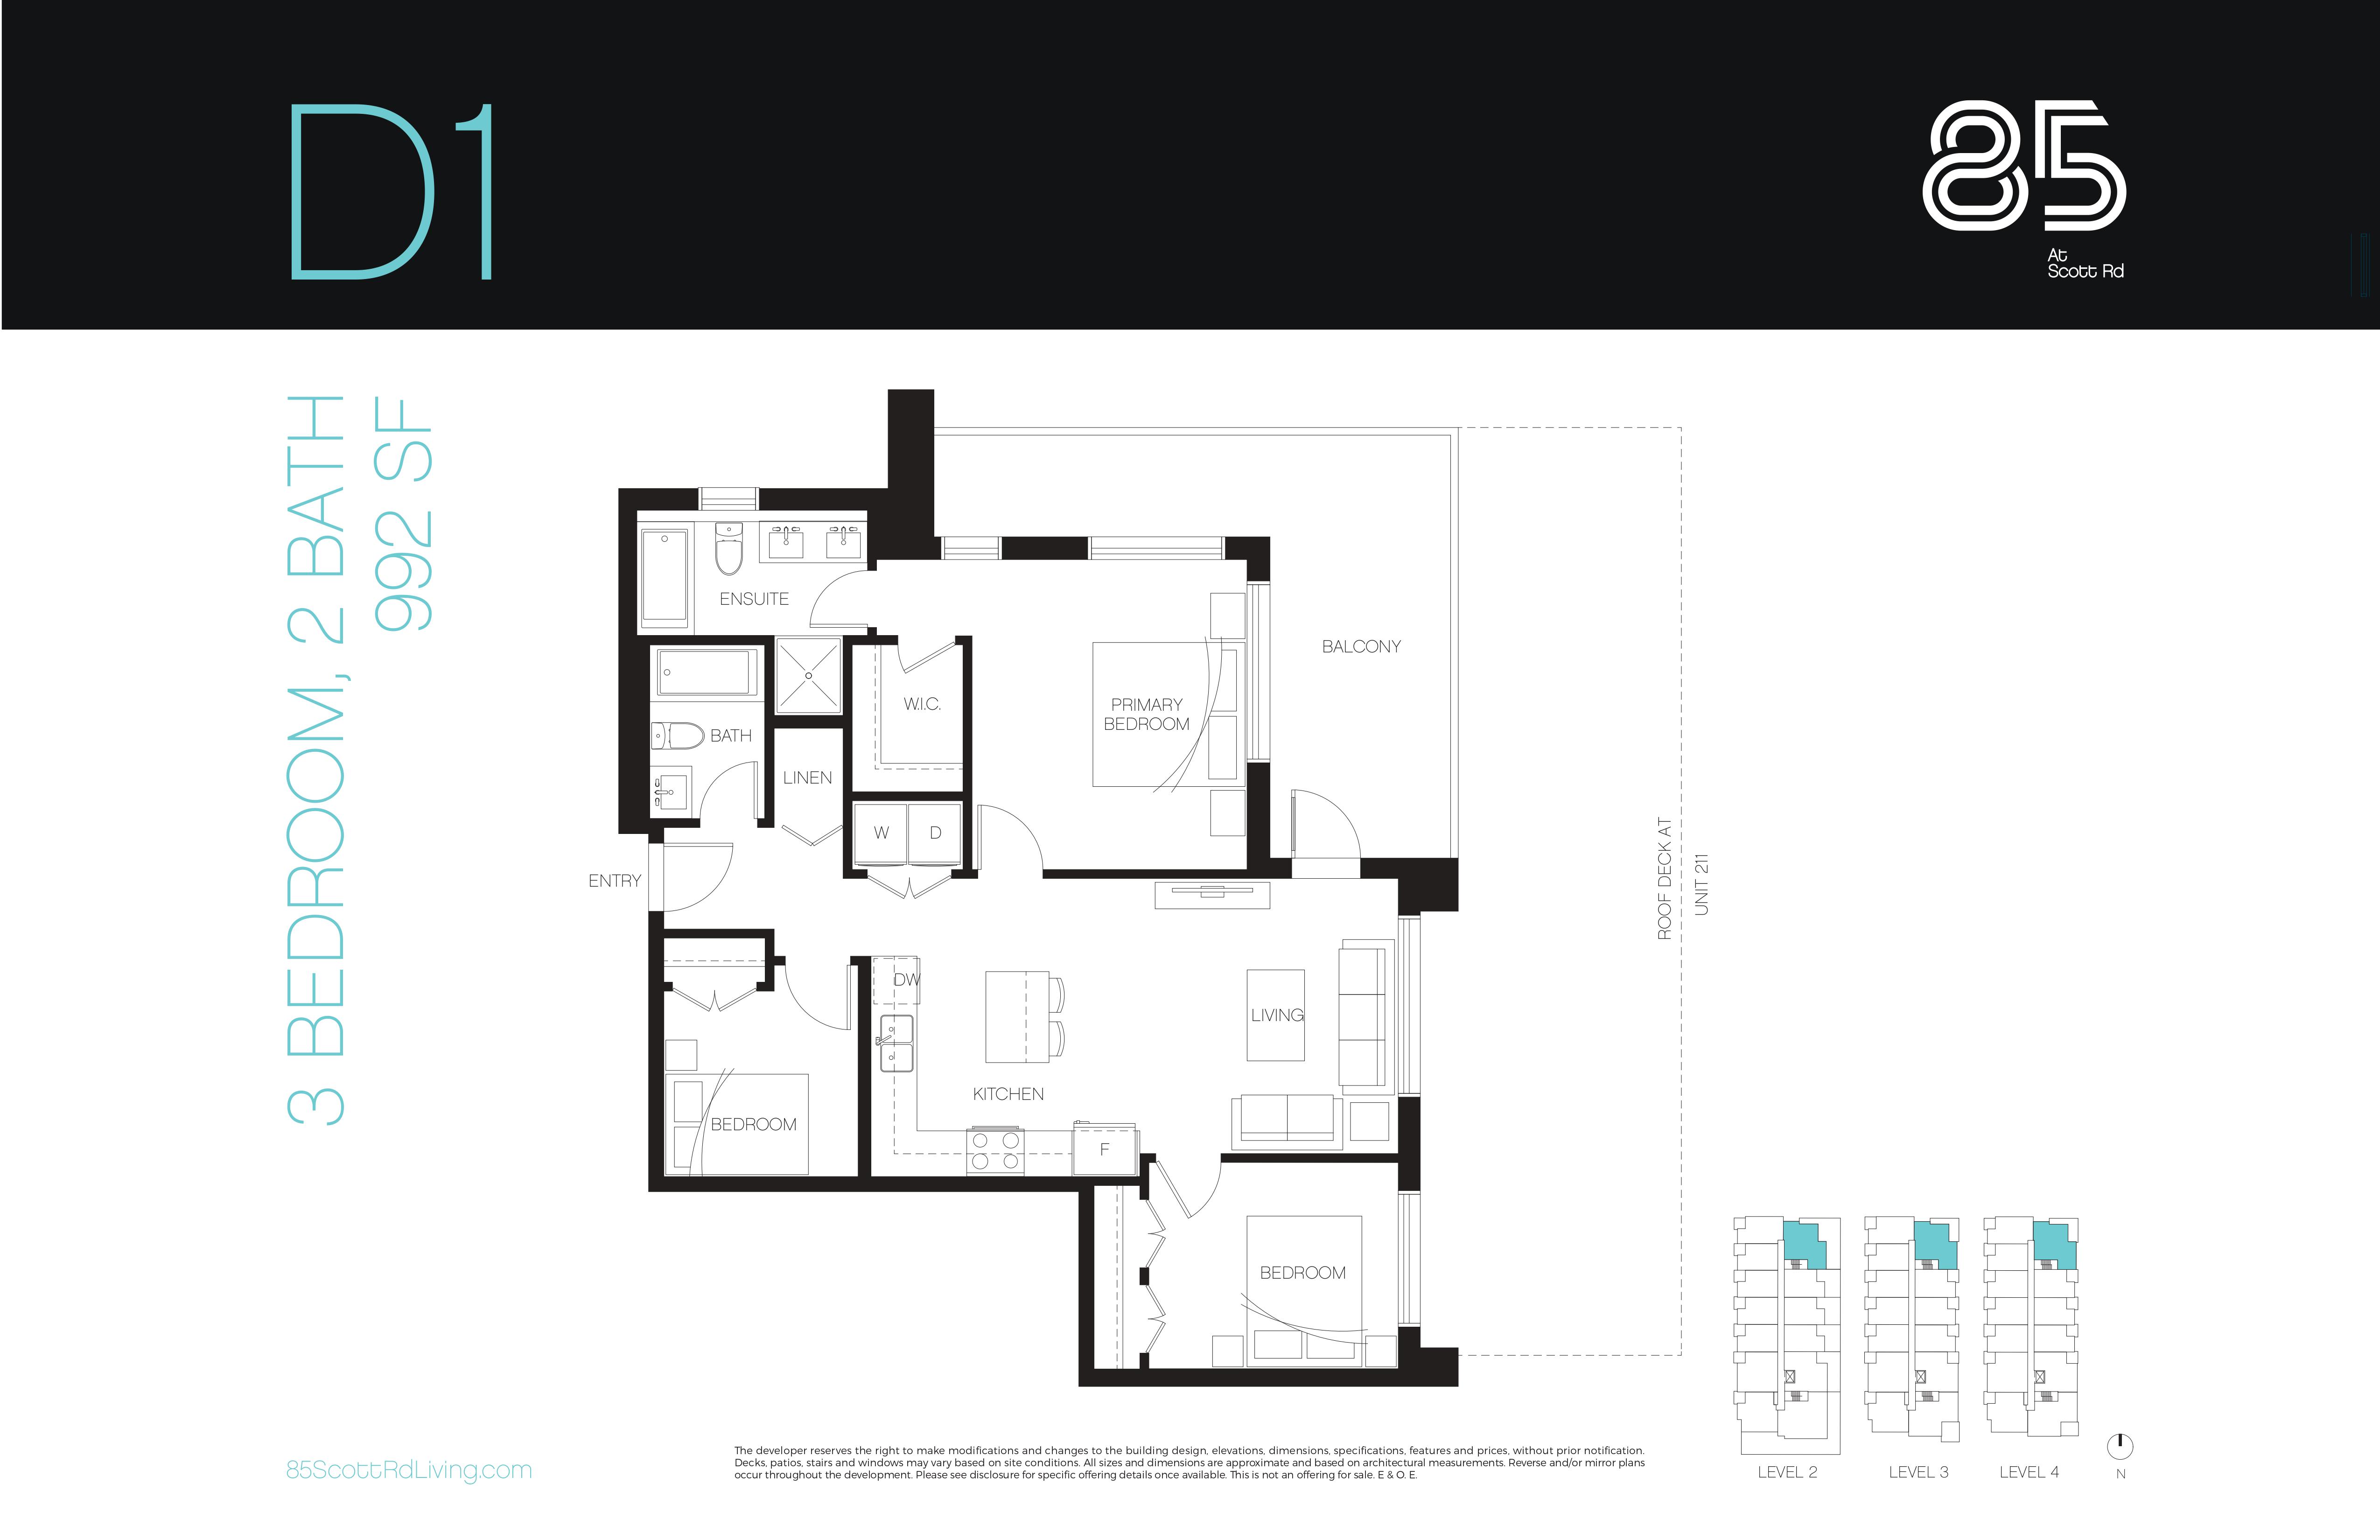 D1 Floor Plan of The 85 Condos with undefined beds